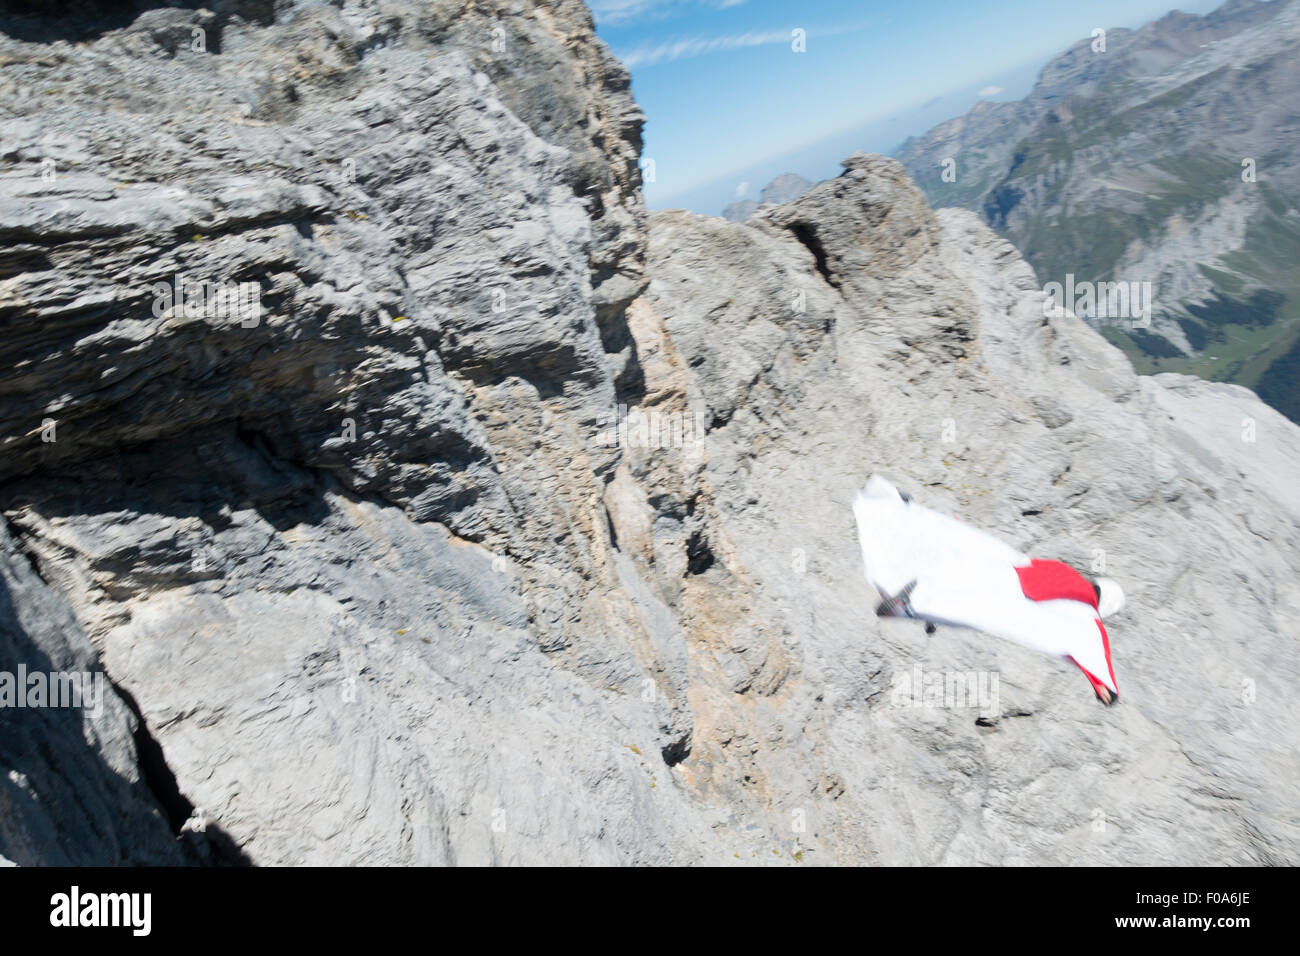 Wingsuit BASE jumper exited off a cliff downwards the valley and started flying with his birdman suit. Stock Photo